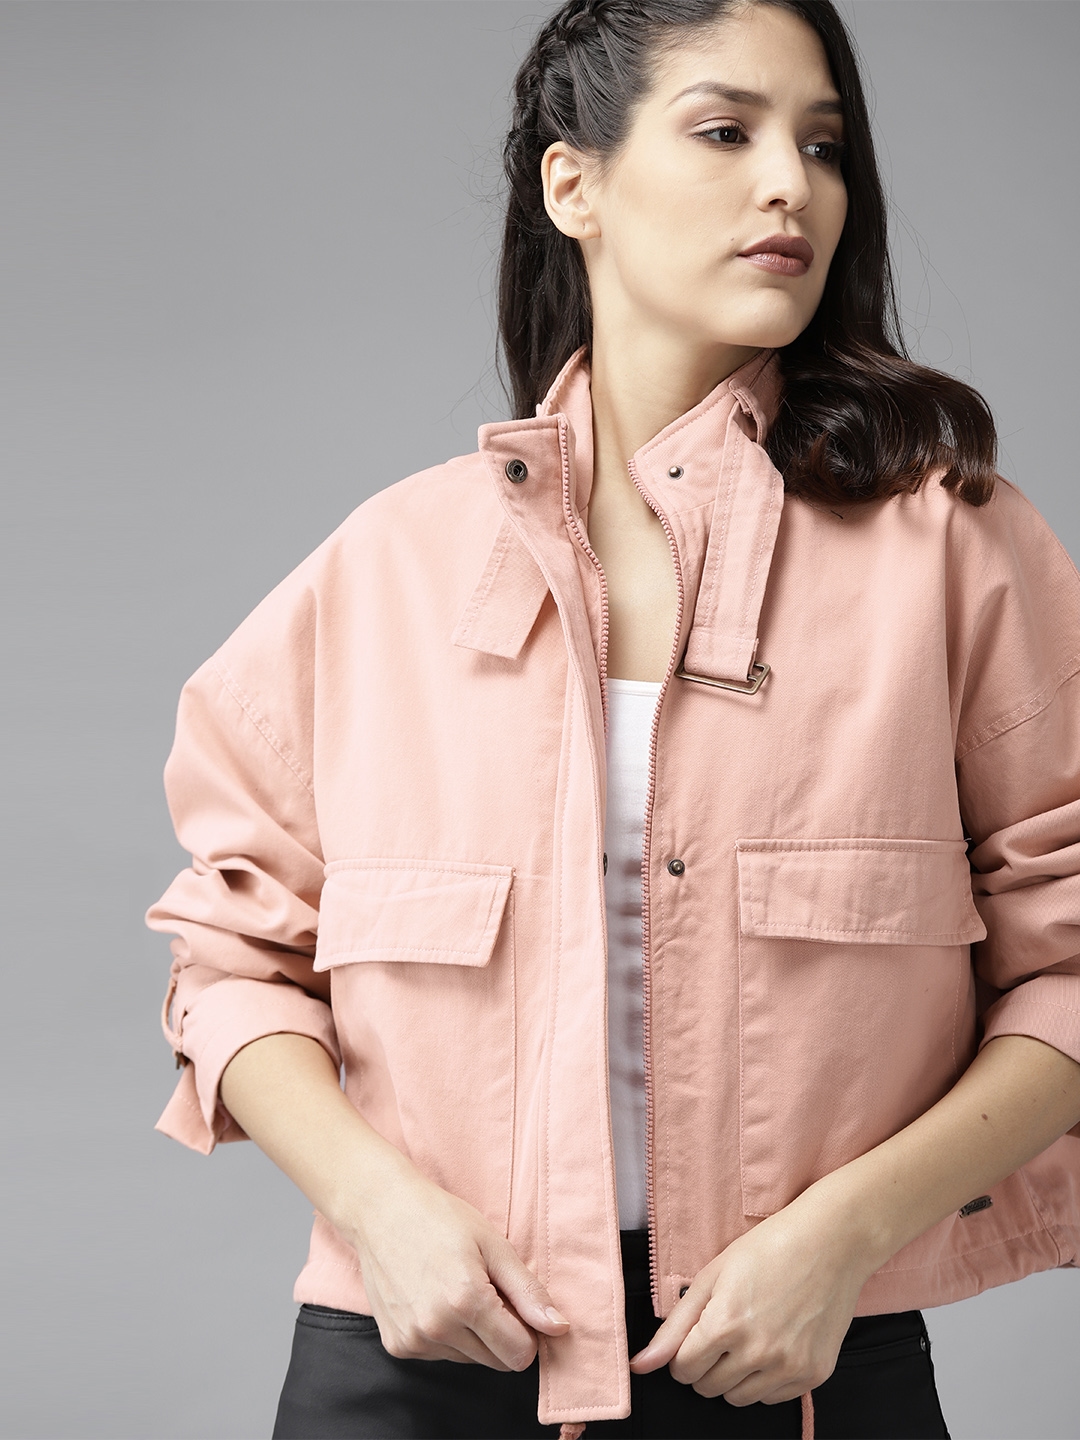 Reveal more than 140 jackets for women